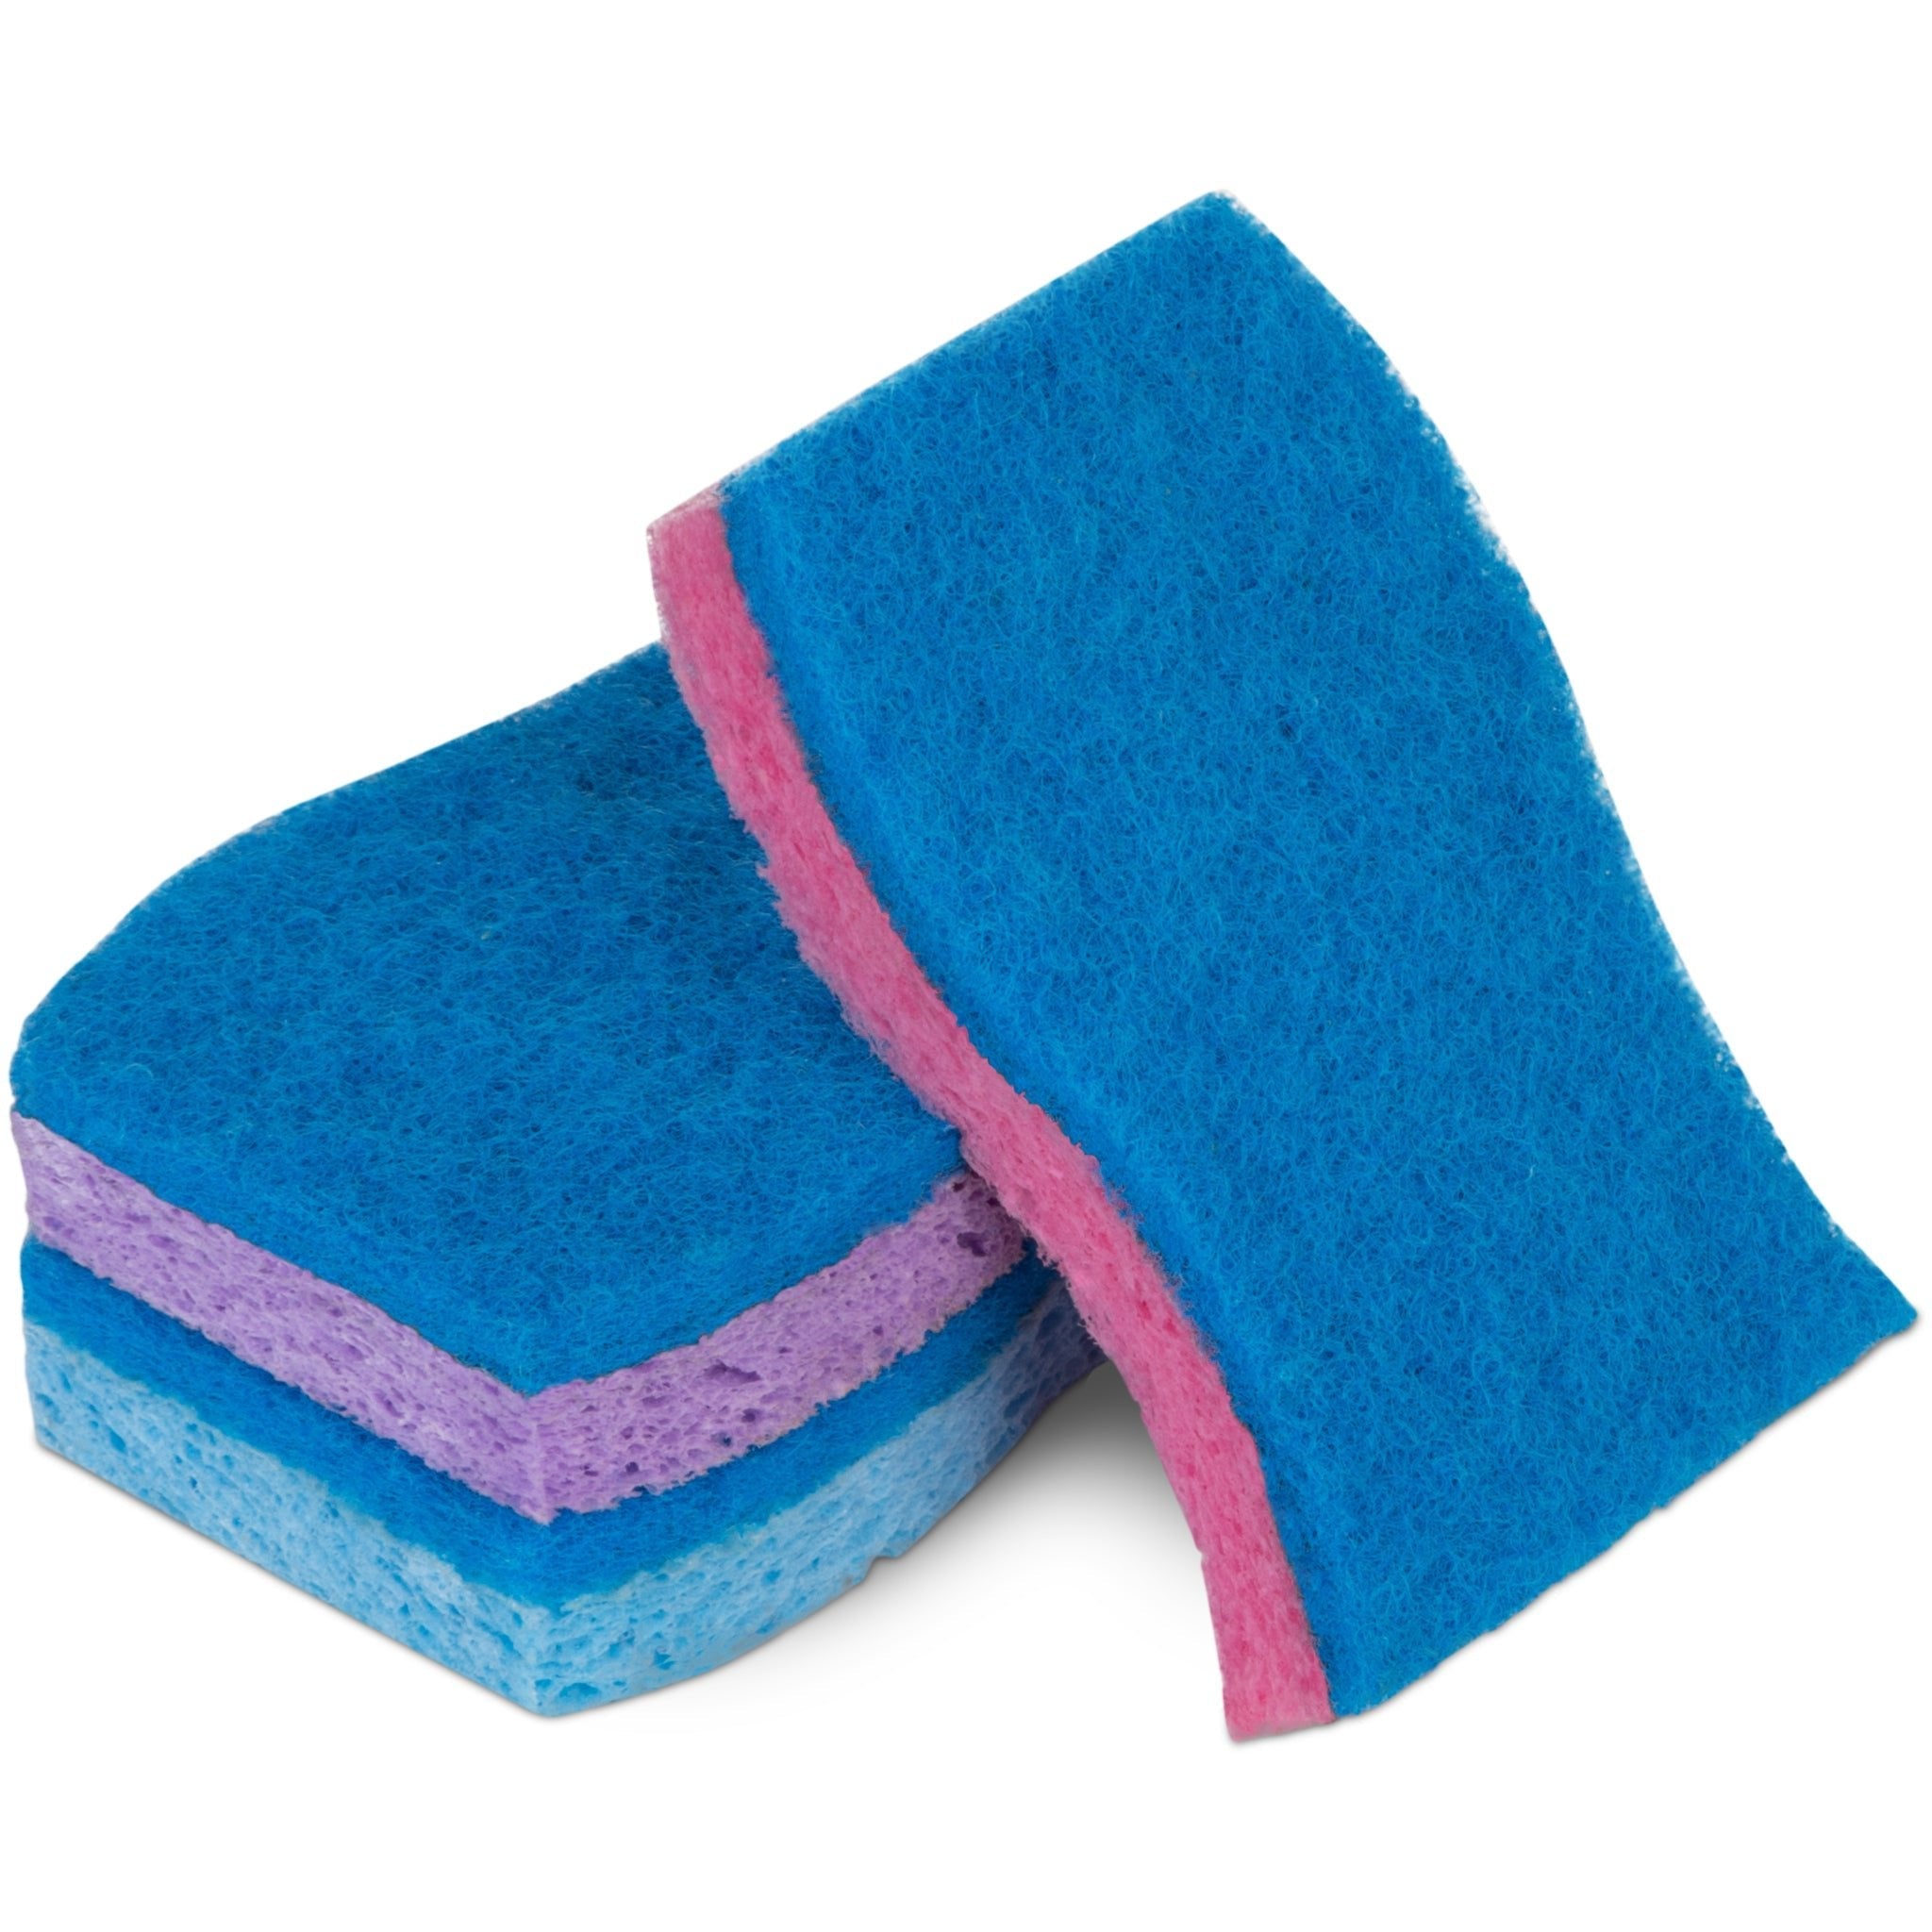 Non-Scratch Cellulose Smart Scrub Sponge Ultra Absorbent Ergonomic Shape Cleaning, Dishes, & Hard Stains - Smart Design 1